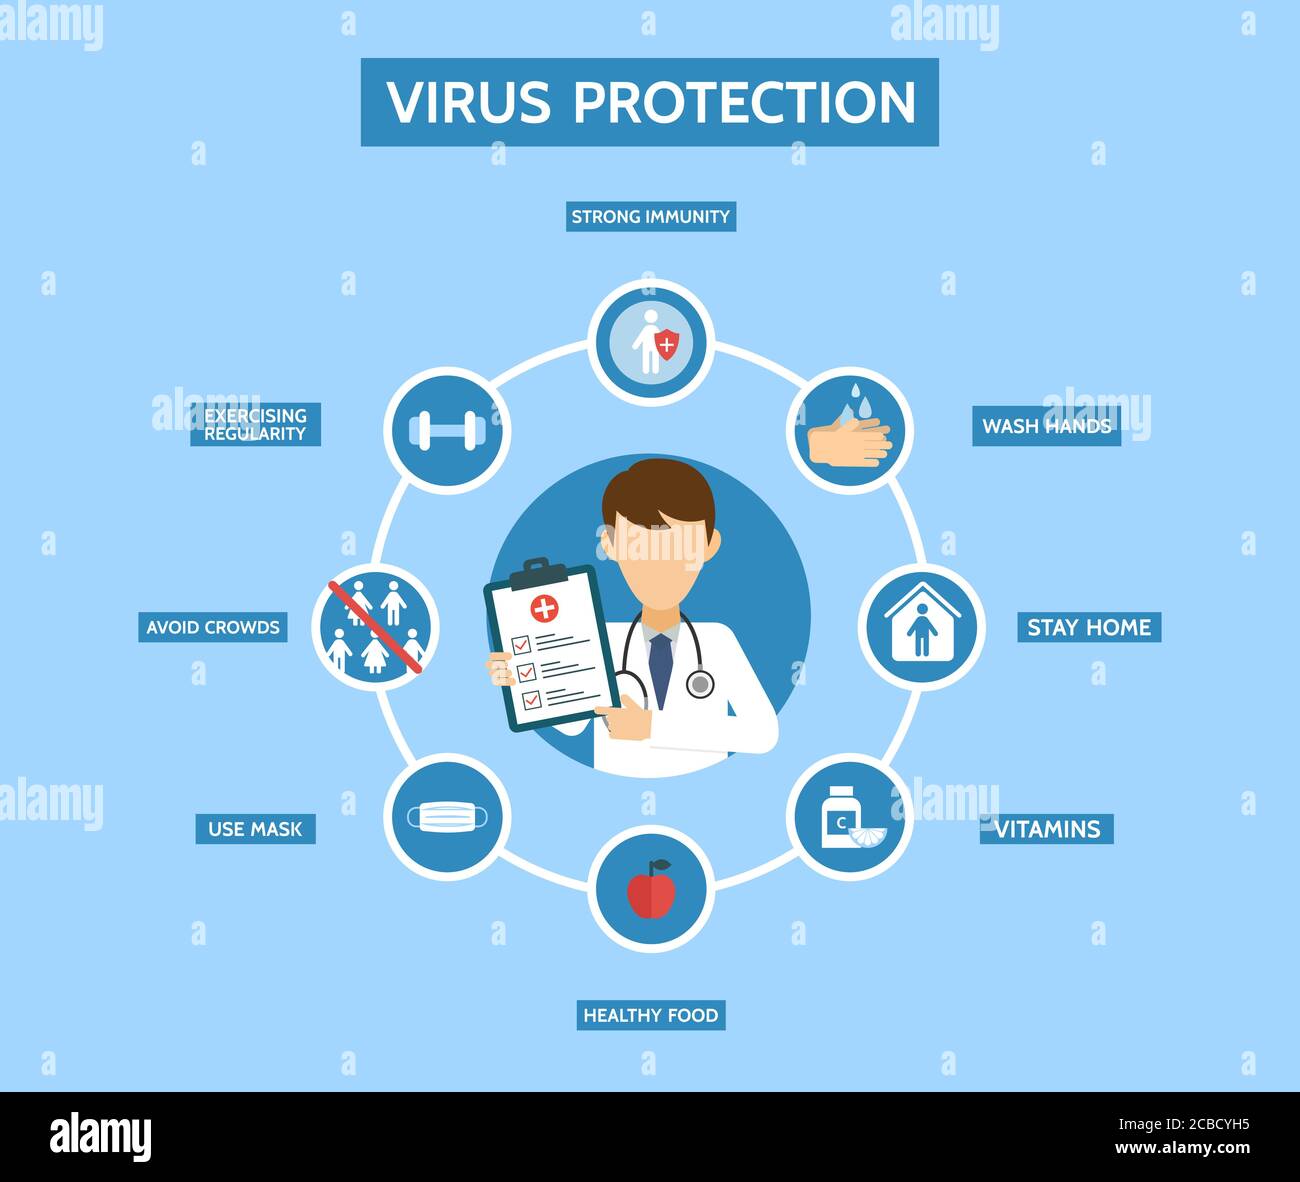 Virus protection infographic. Stop virus. Medical examination. Corona virus prevention. Virus Covid 19-NCP. Stay at home concept. Wash your hands. Stock Vector